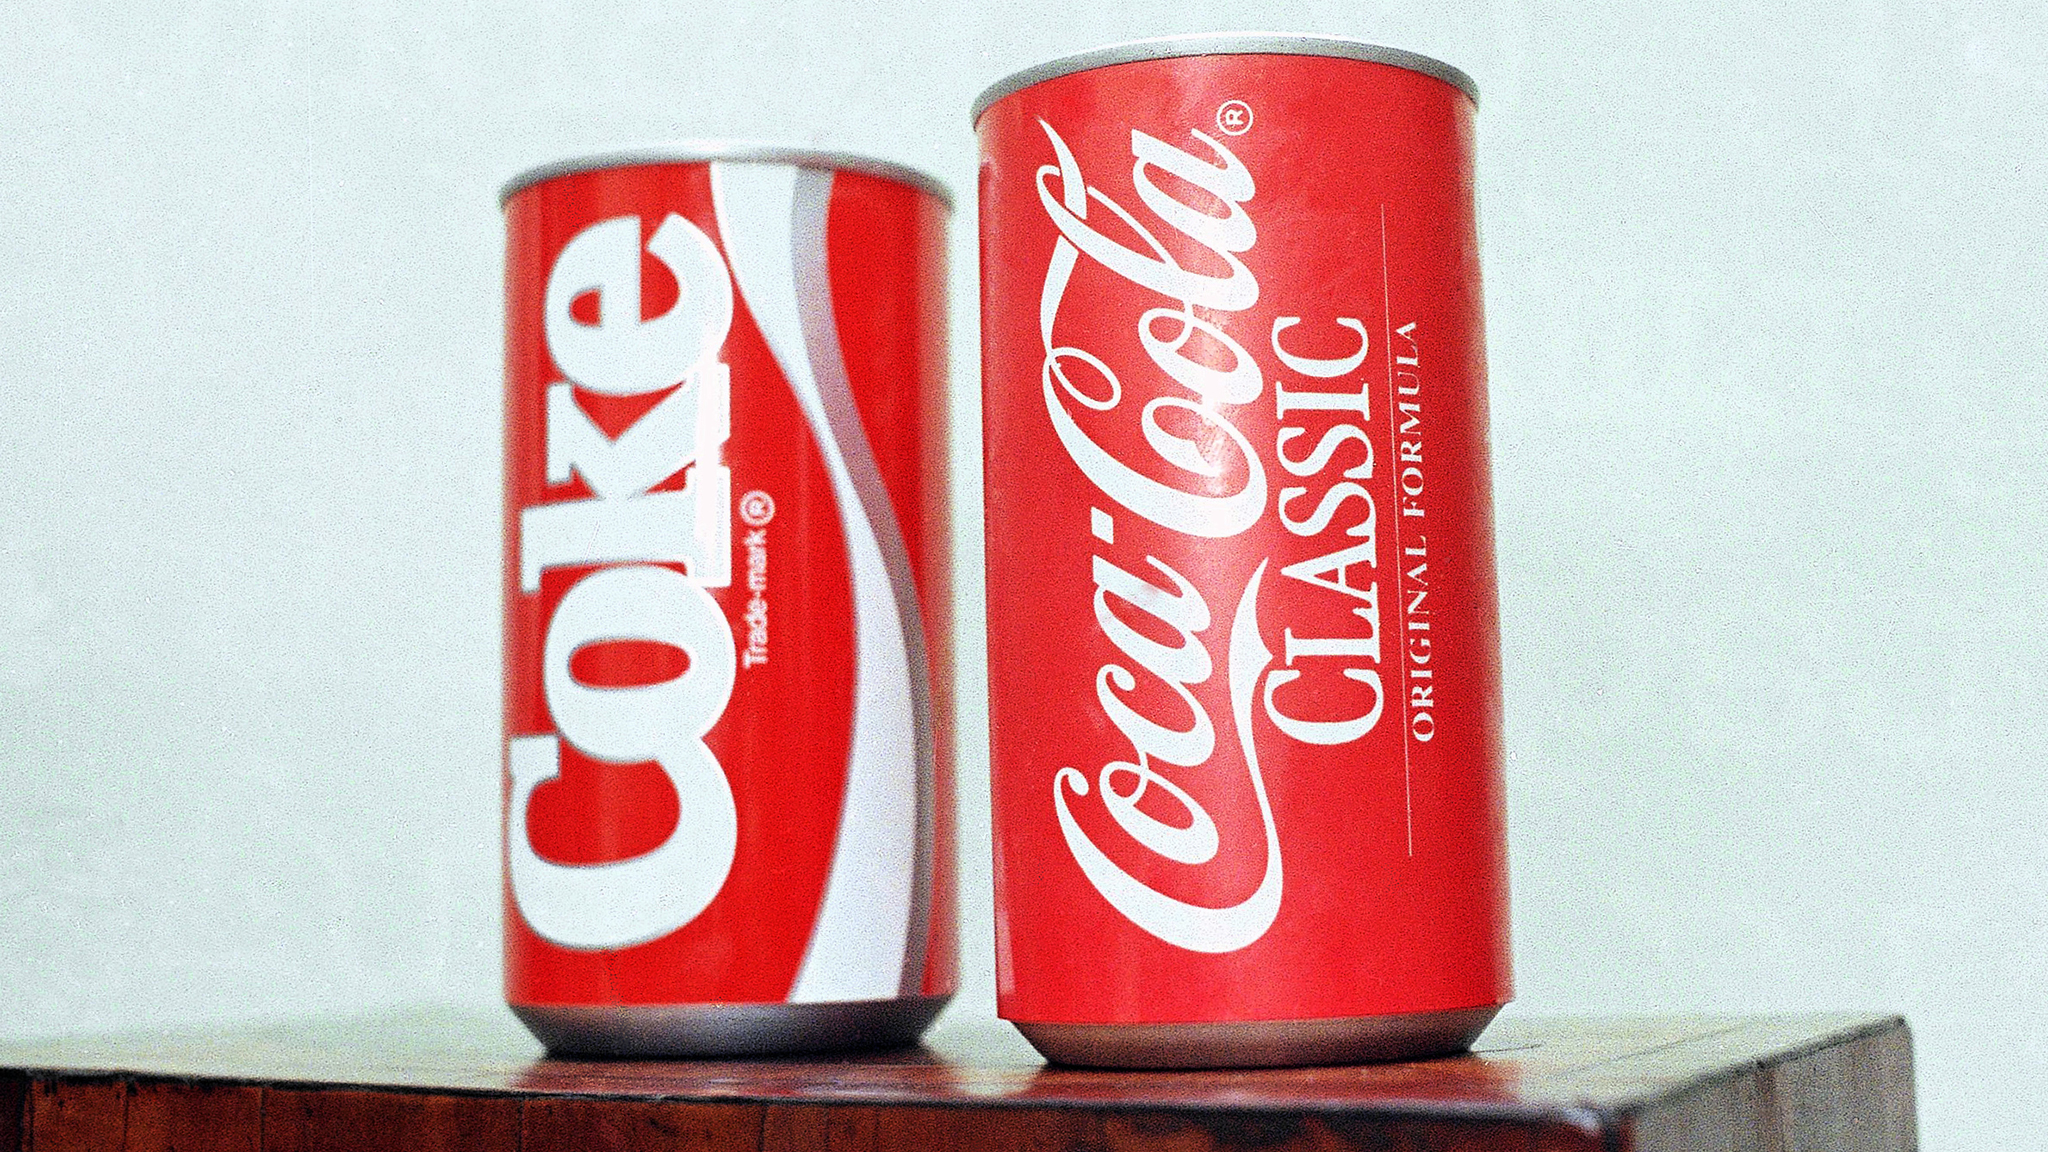 Read More: The Disastrous 'New Coke' Flop